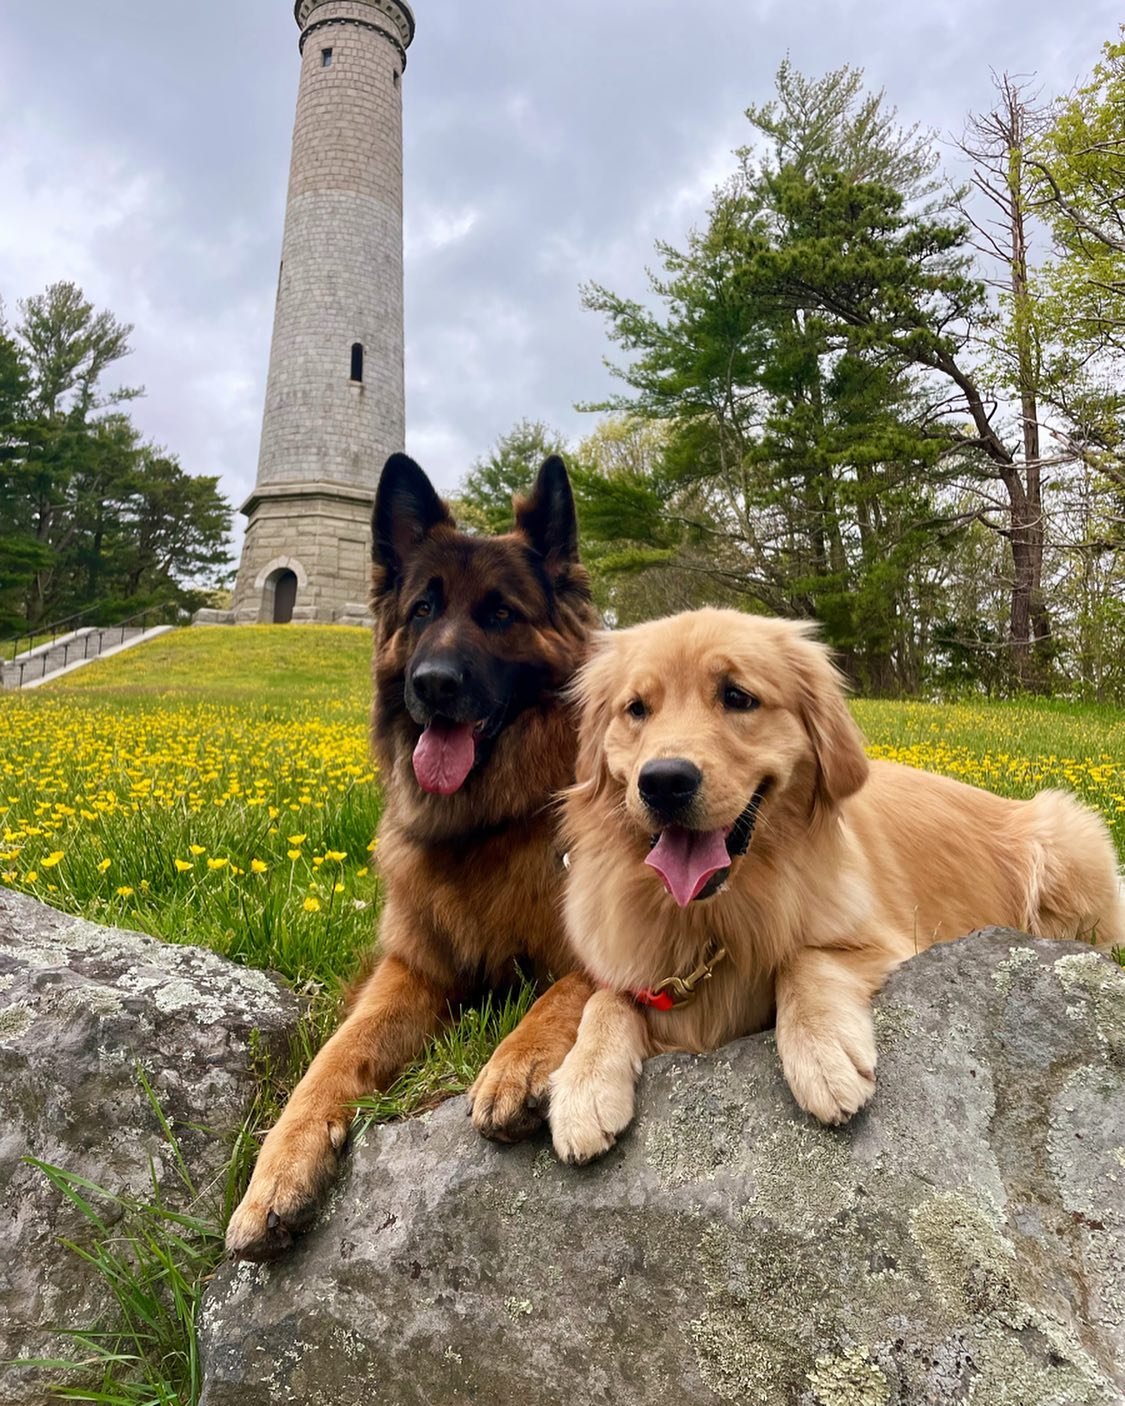 Dan and Sophie did a hike to the monument in Dux!